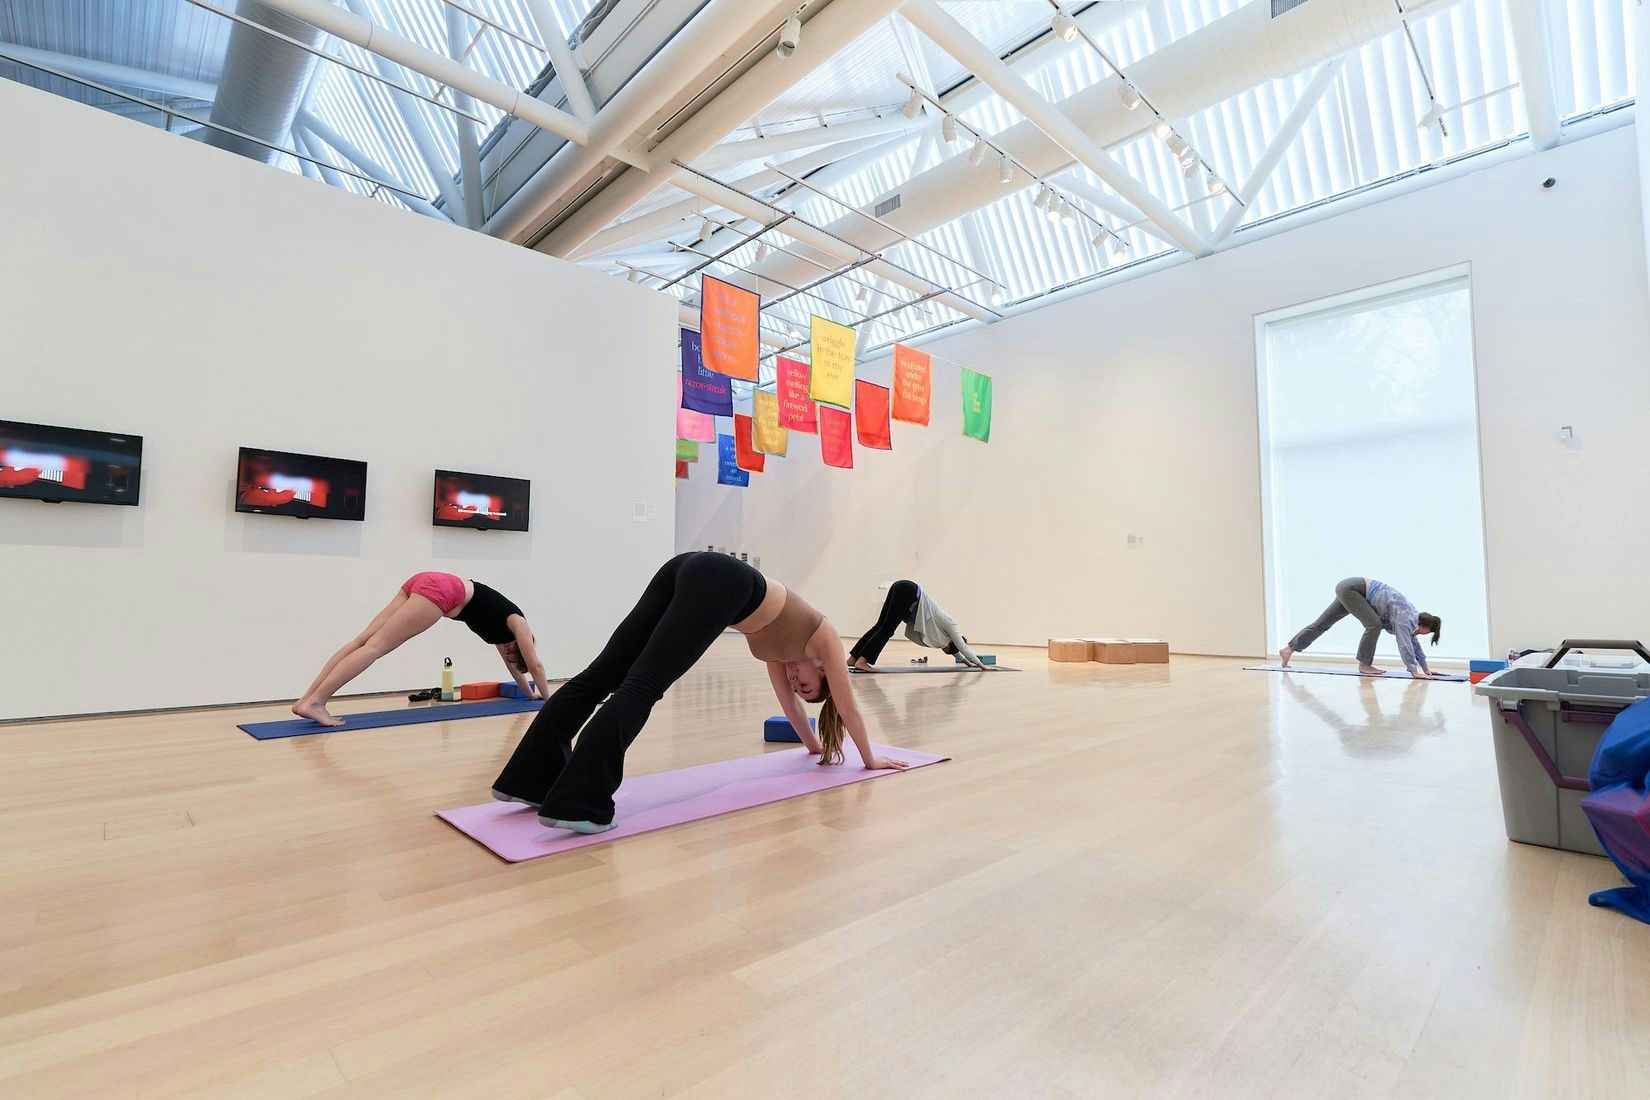 View of a group doing Yoga at the Gund Gallery